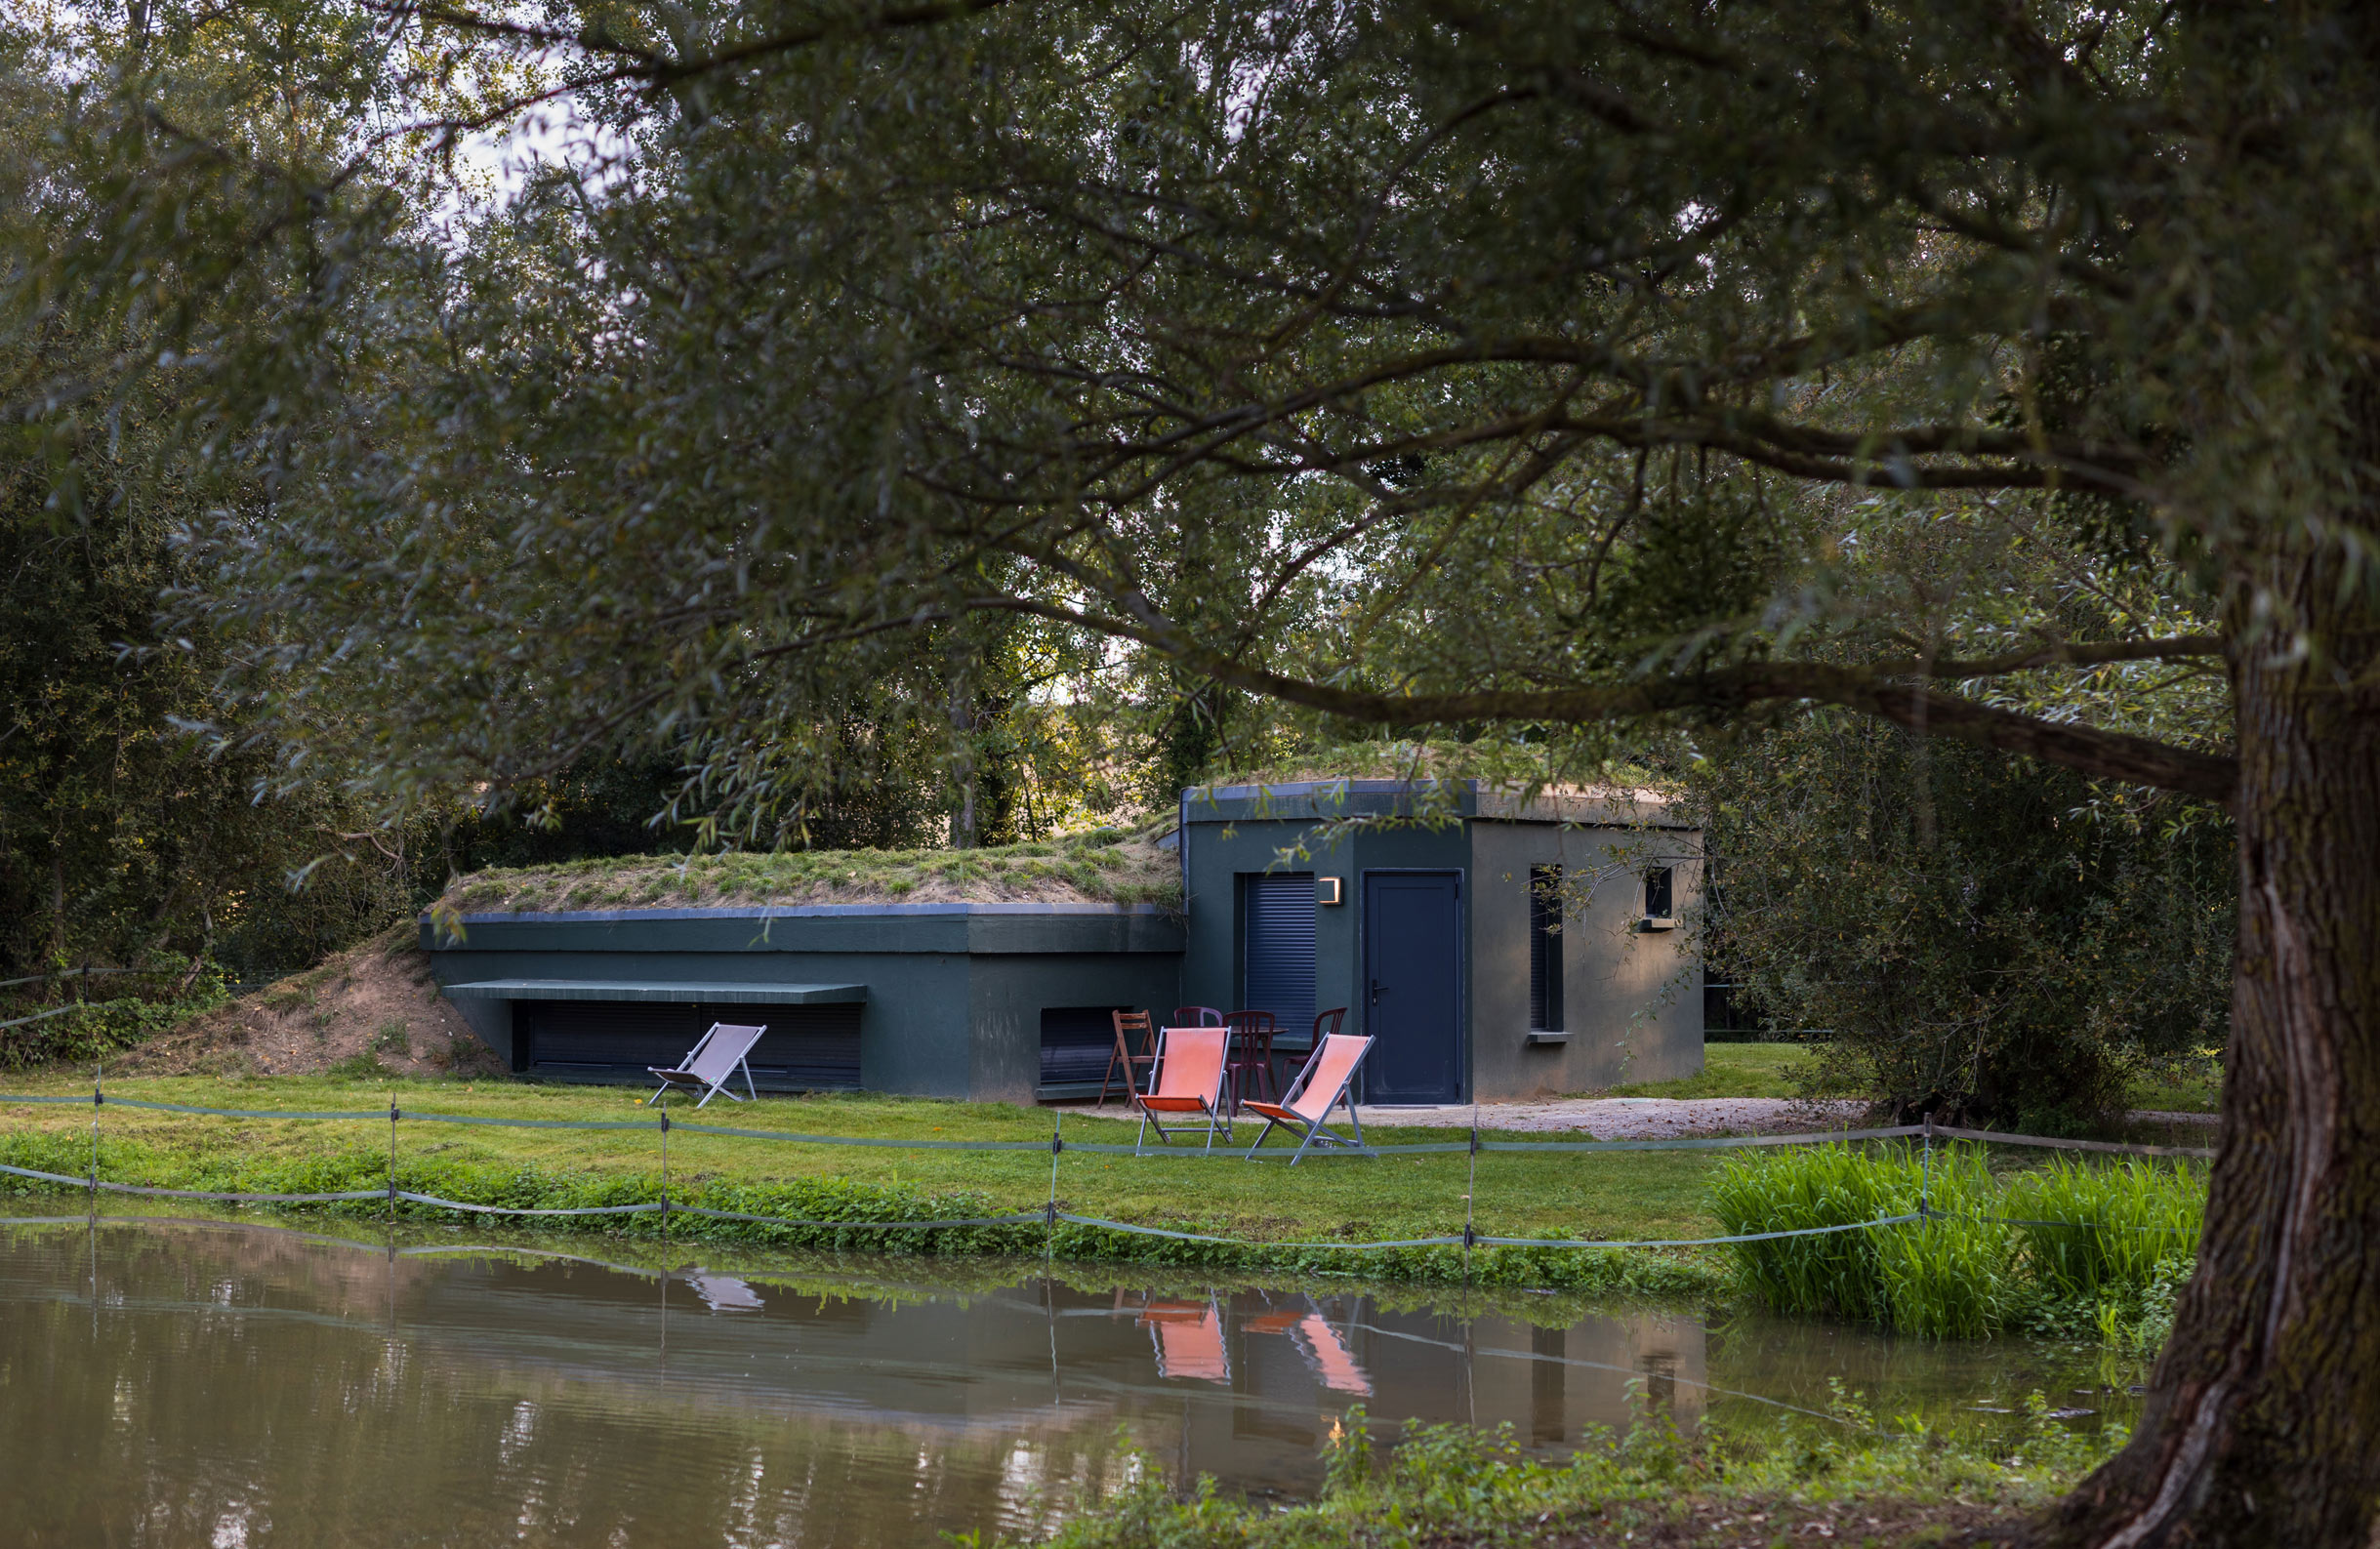 ‘Maison des Oiseaux’ at the Domaine du Lieu Dieu near the A28 motorway and the Somme Bay is an unusual place to stay in France and a luxury birdwatching hide